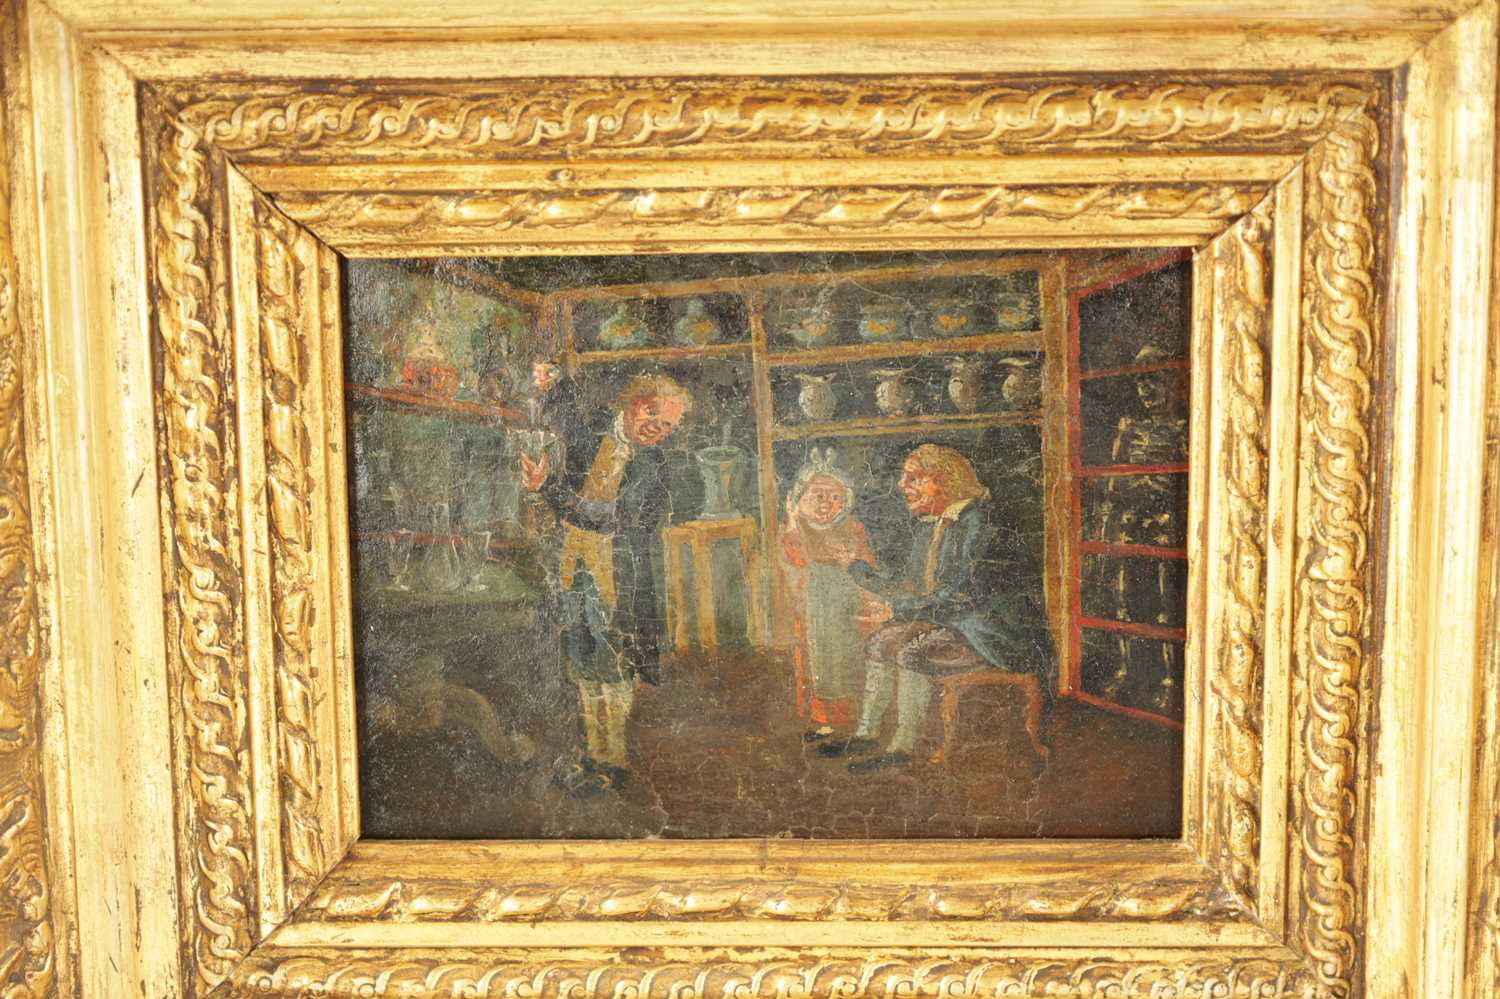 18TH/19TH CENTURY OIL ON OAK PANEL - THE CHINA DEALER’S SHOP - Image 2 of 5